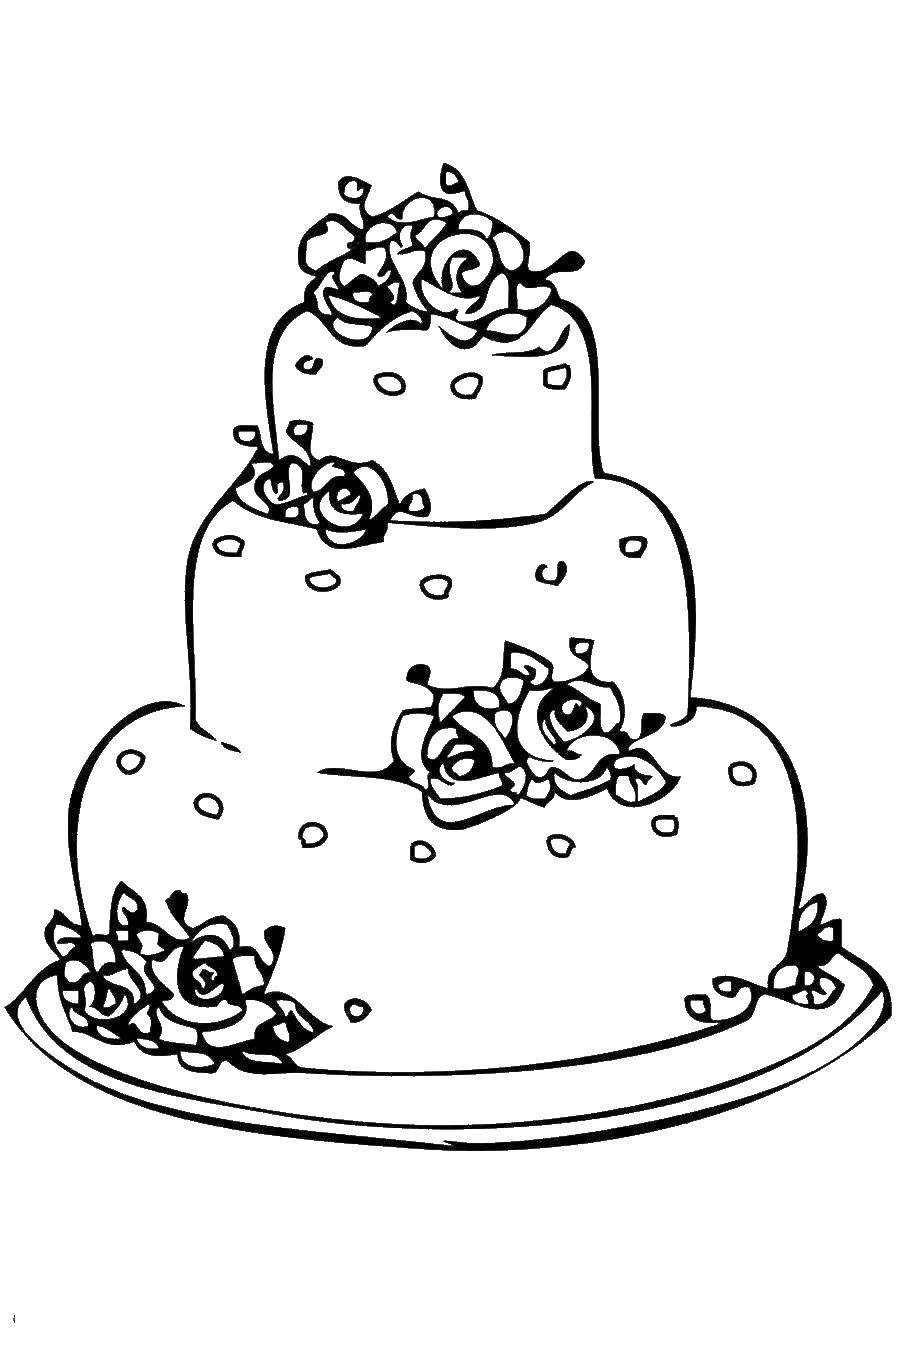 Coloring A three-tiered cake. Category cakes. Tags:  cake, plate, flowers.